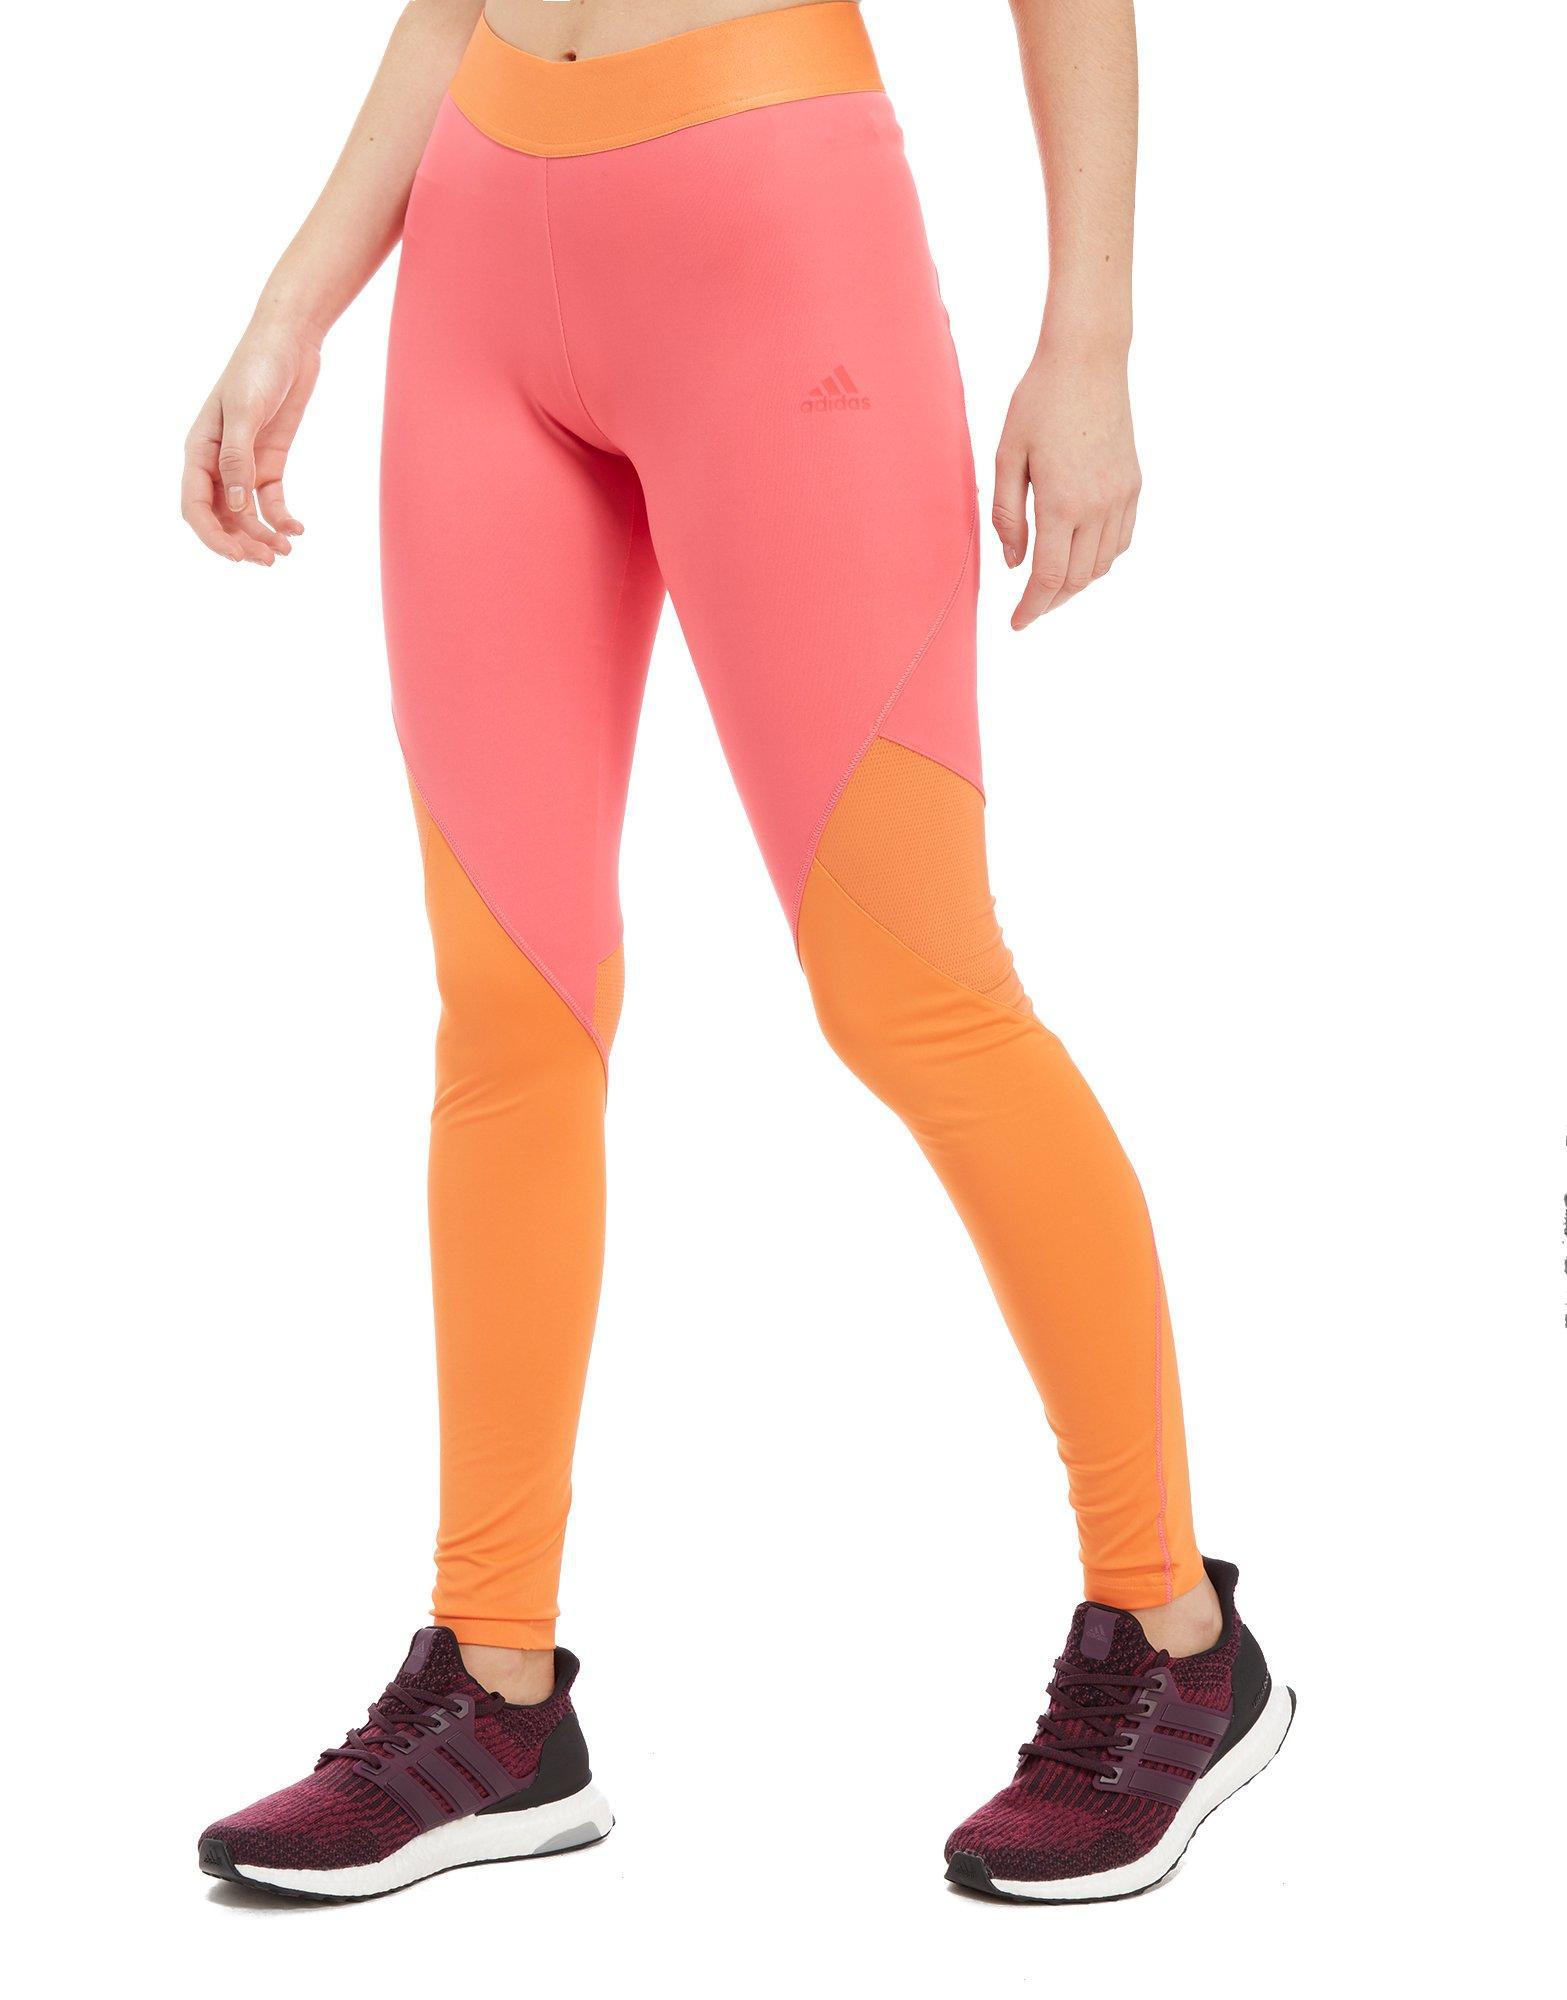 adidas Synthetic Climacool Logo Long Tights in Orange/Pink (Pink) - Lyst